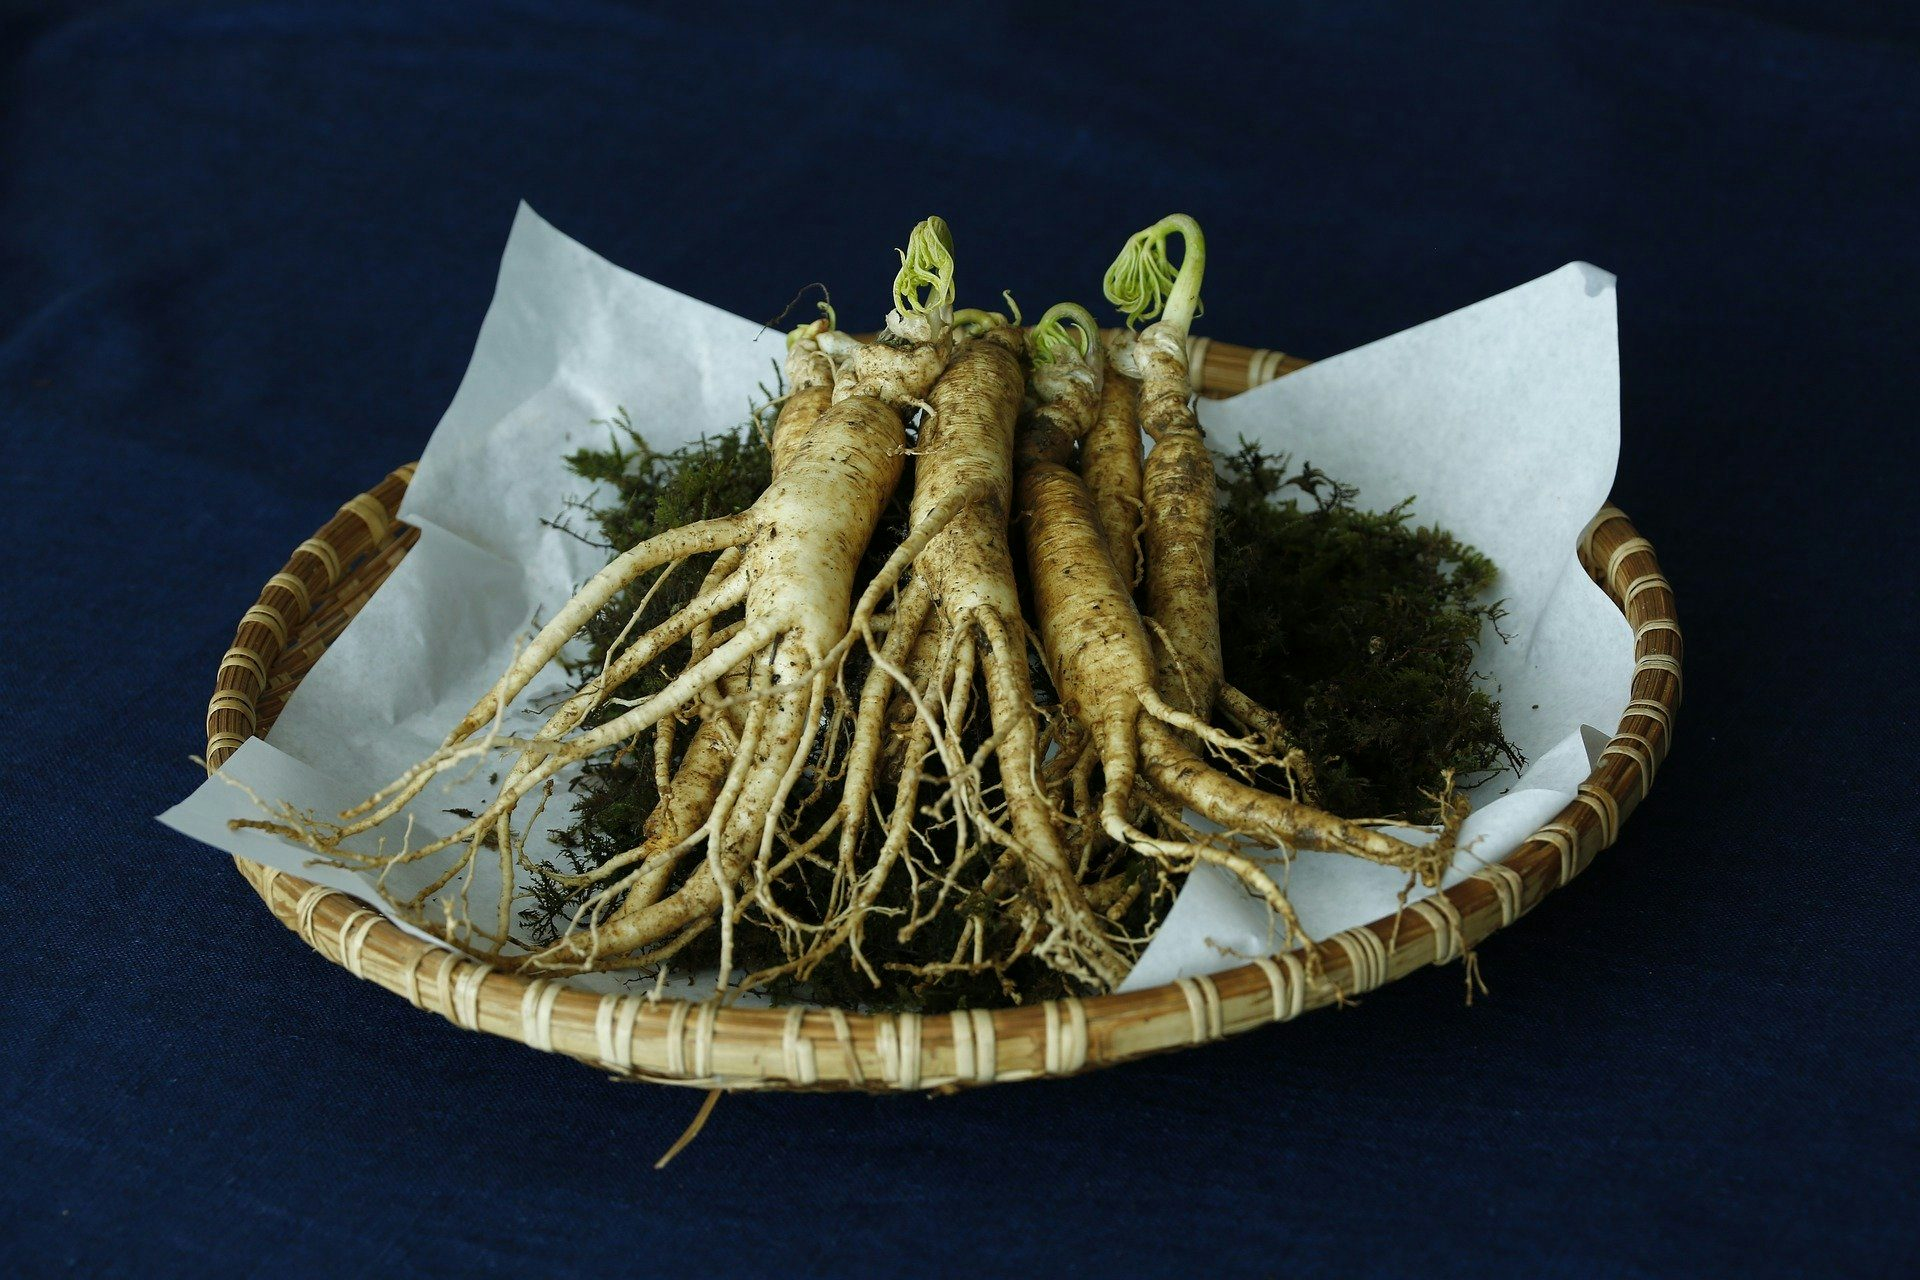 Ginseng extract evaporating